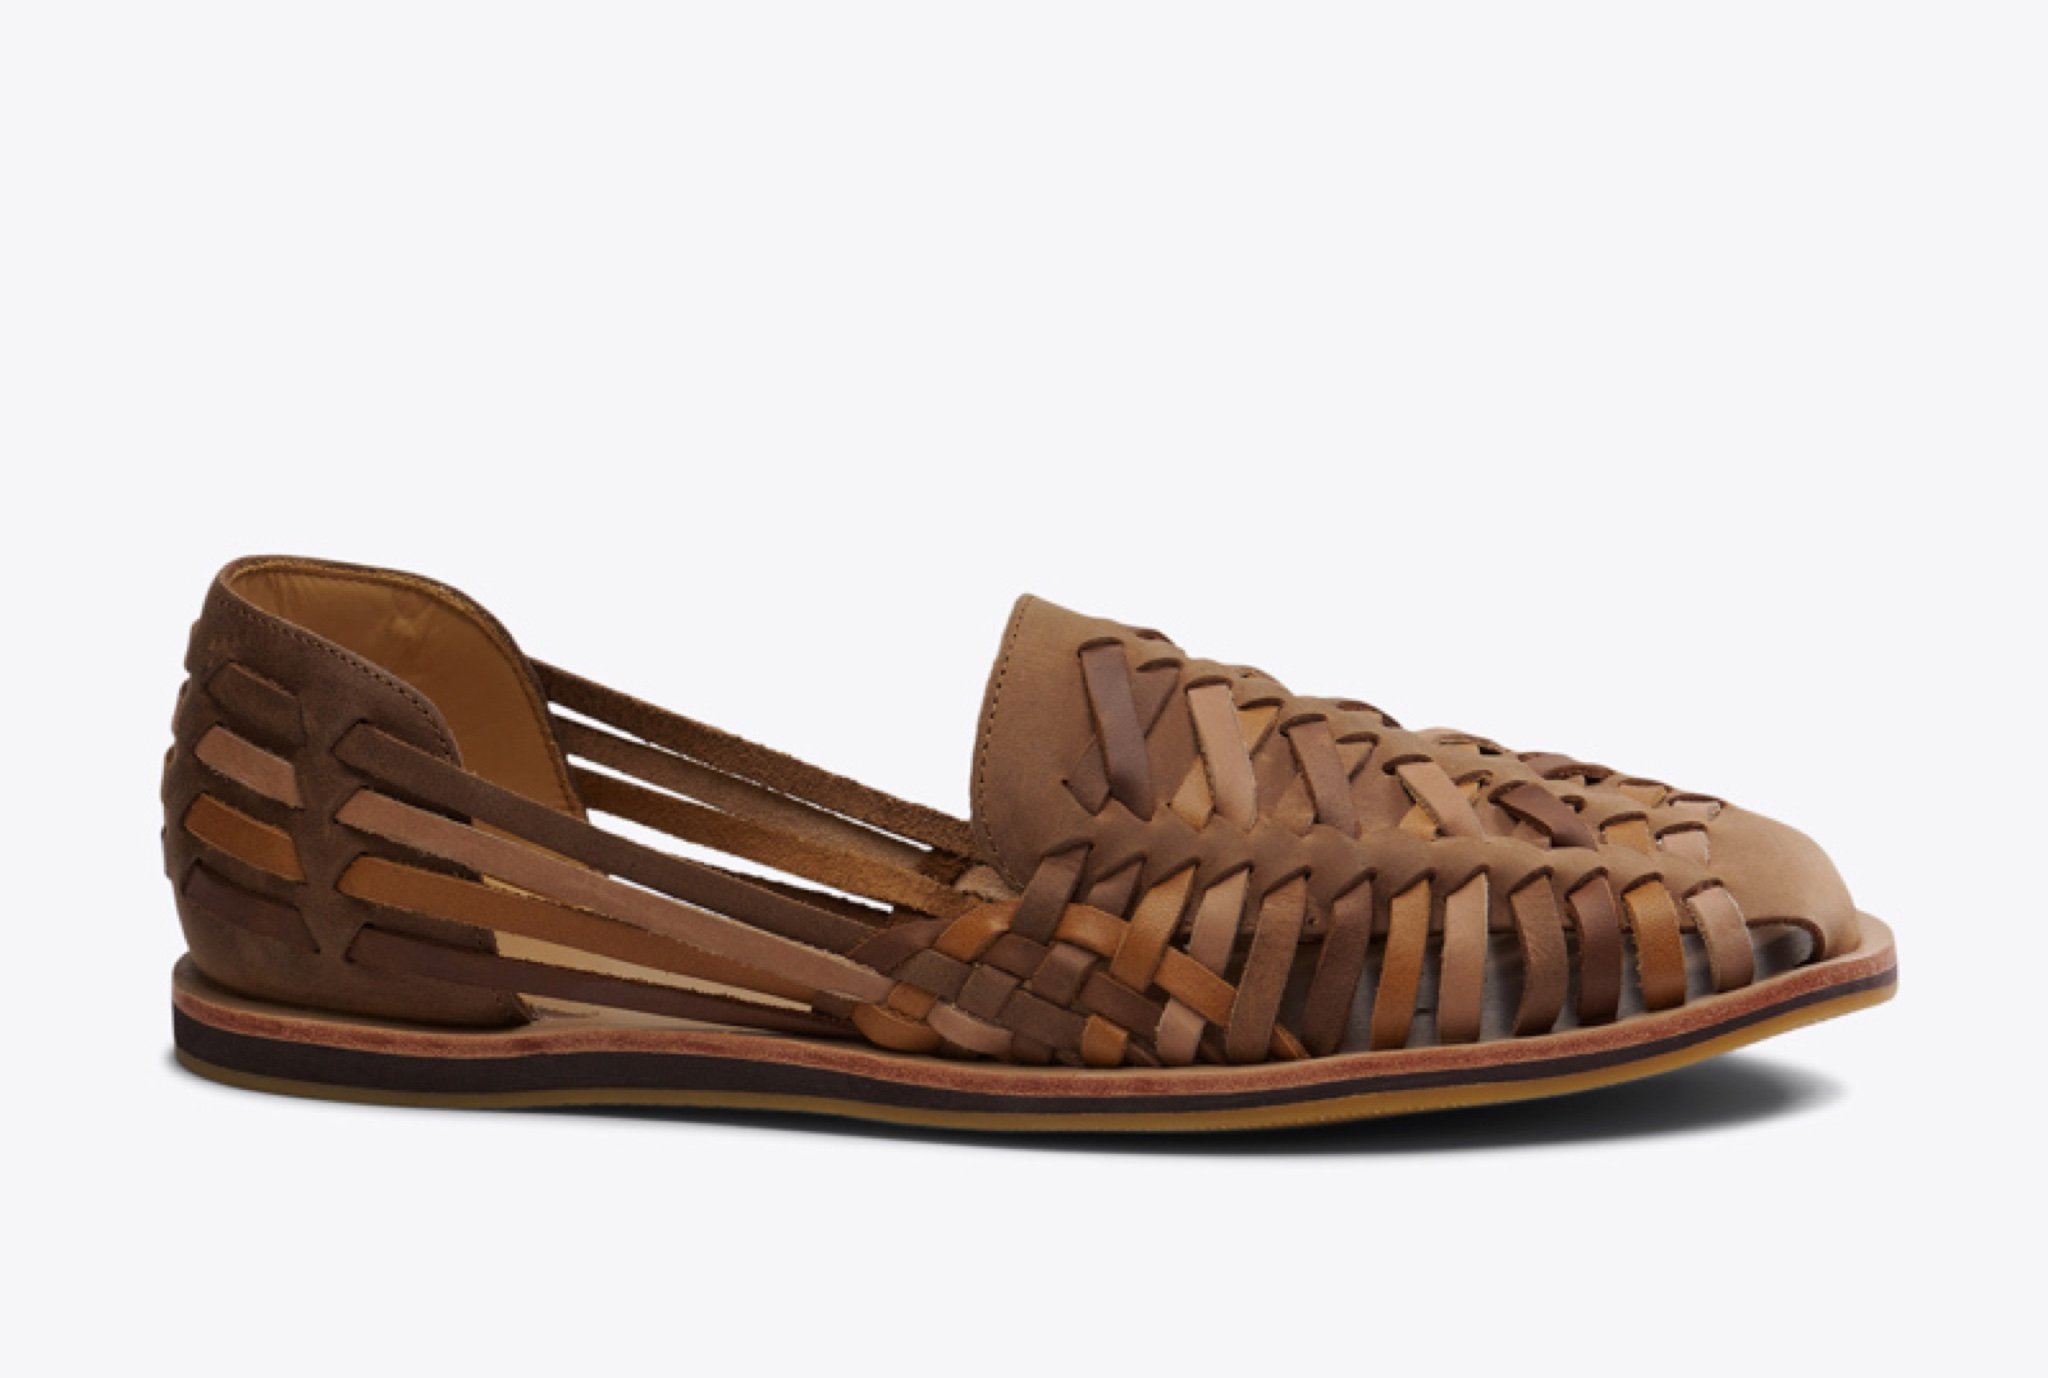 Nisolo Men's Huarache Sandal Tobacco Colorblock - Every Nisolo product is built on the foundation of comfort, function, and design. 